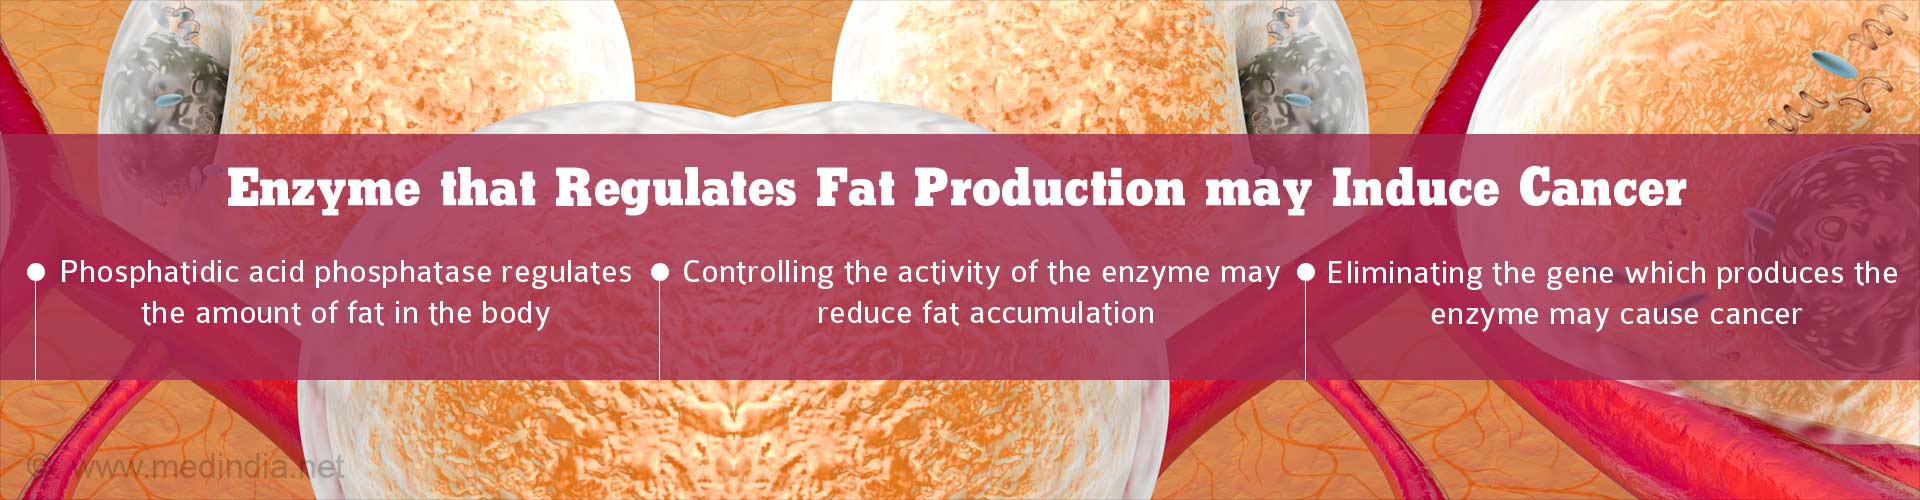 Enzyme that regulates fat production may induce cancer
- Phosphatidic acid phosphatase regulates the amount of fat in the body
- Controlling the activity of the enzyme may reduce fat accumulation
- Eliminating the gene which produces the enzyme may cause cancer